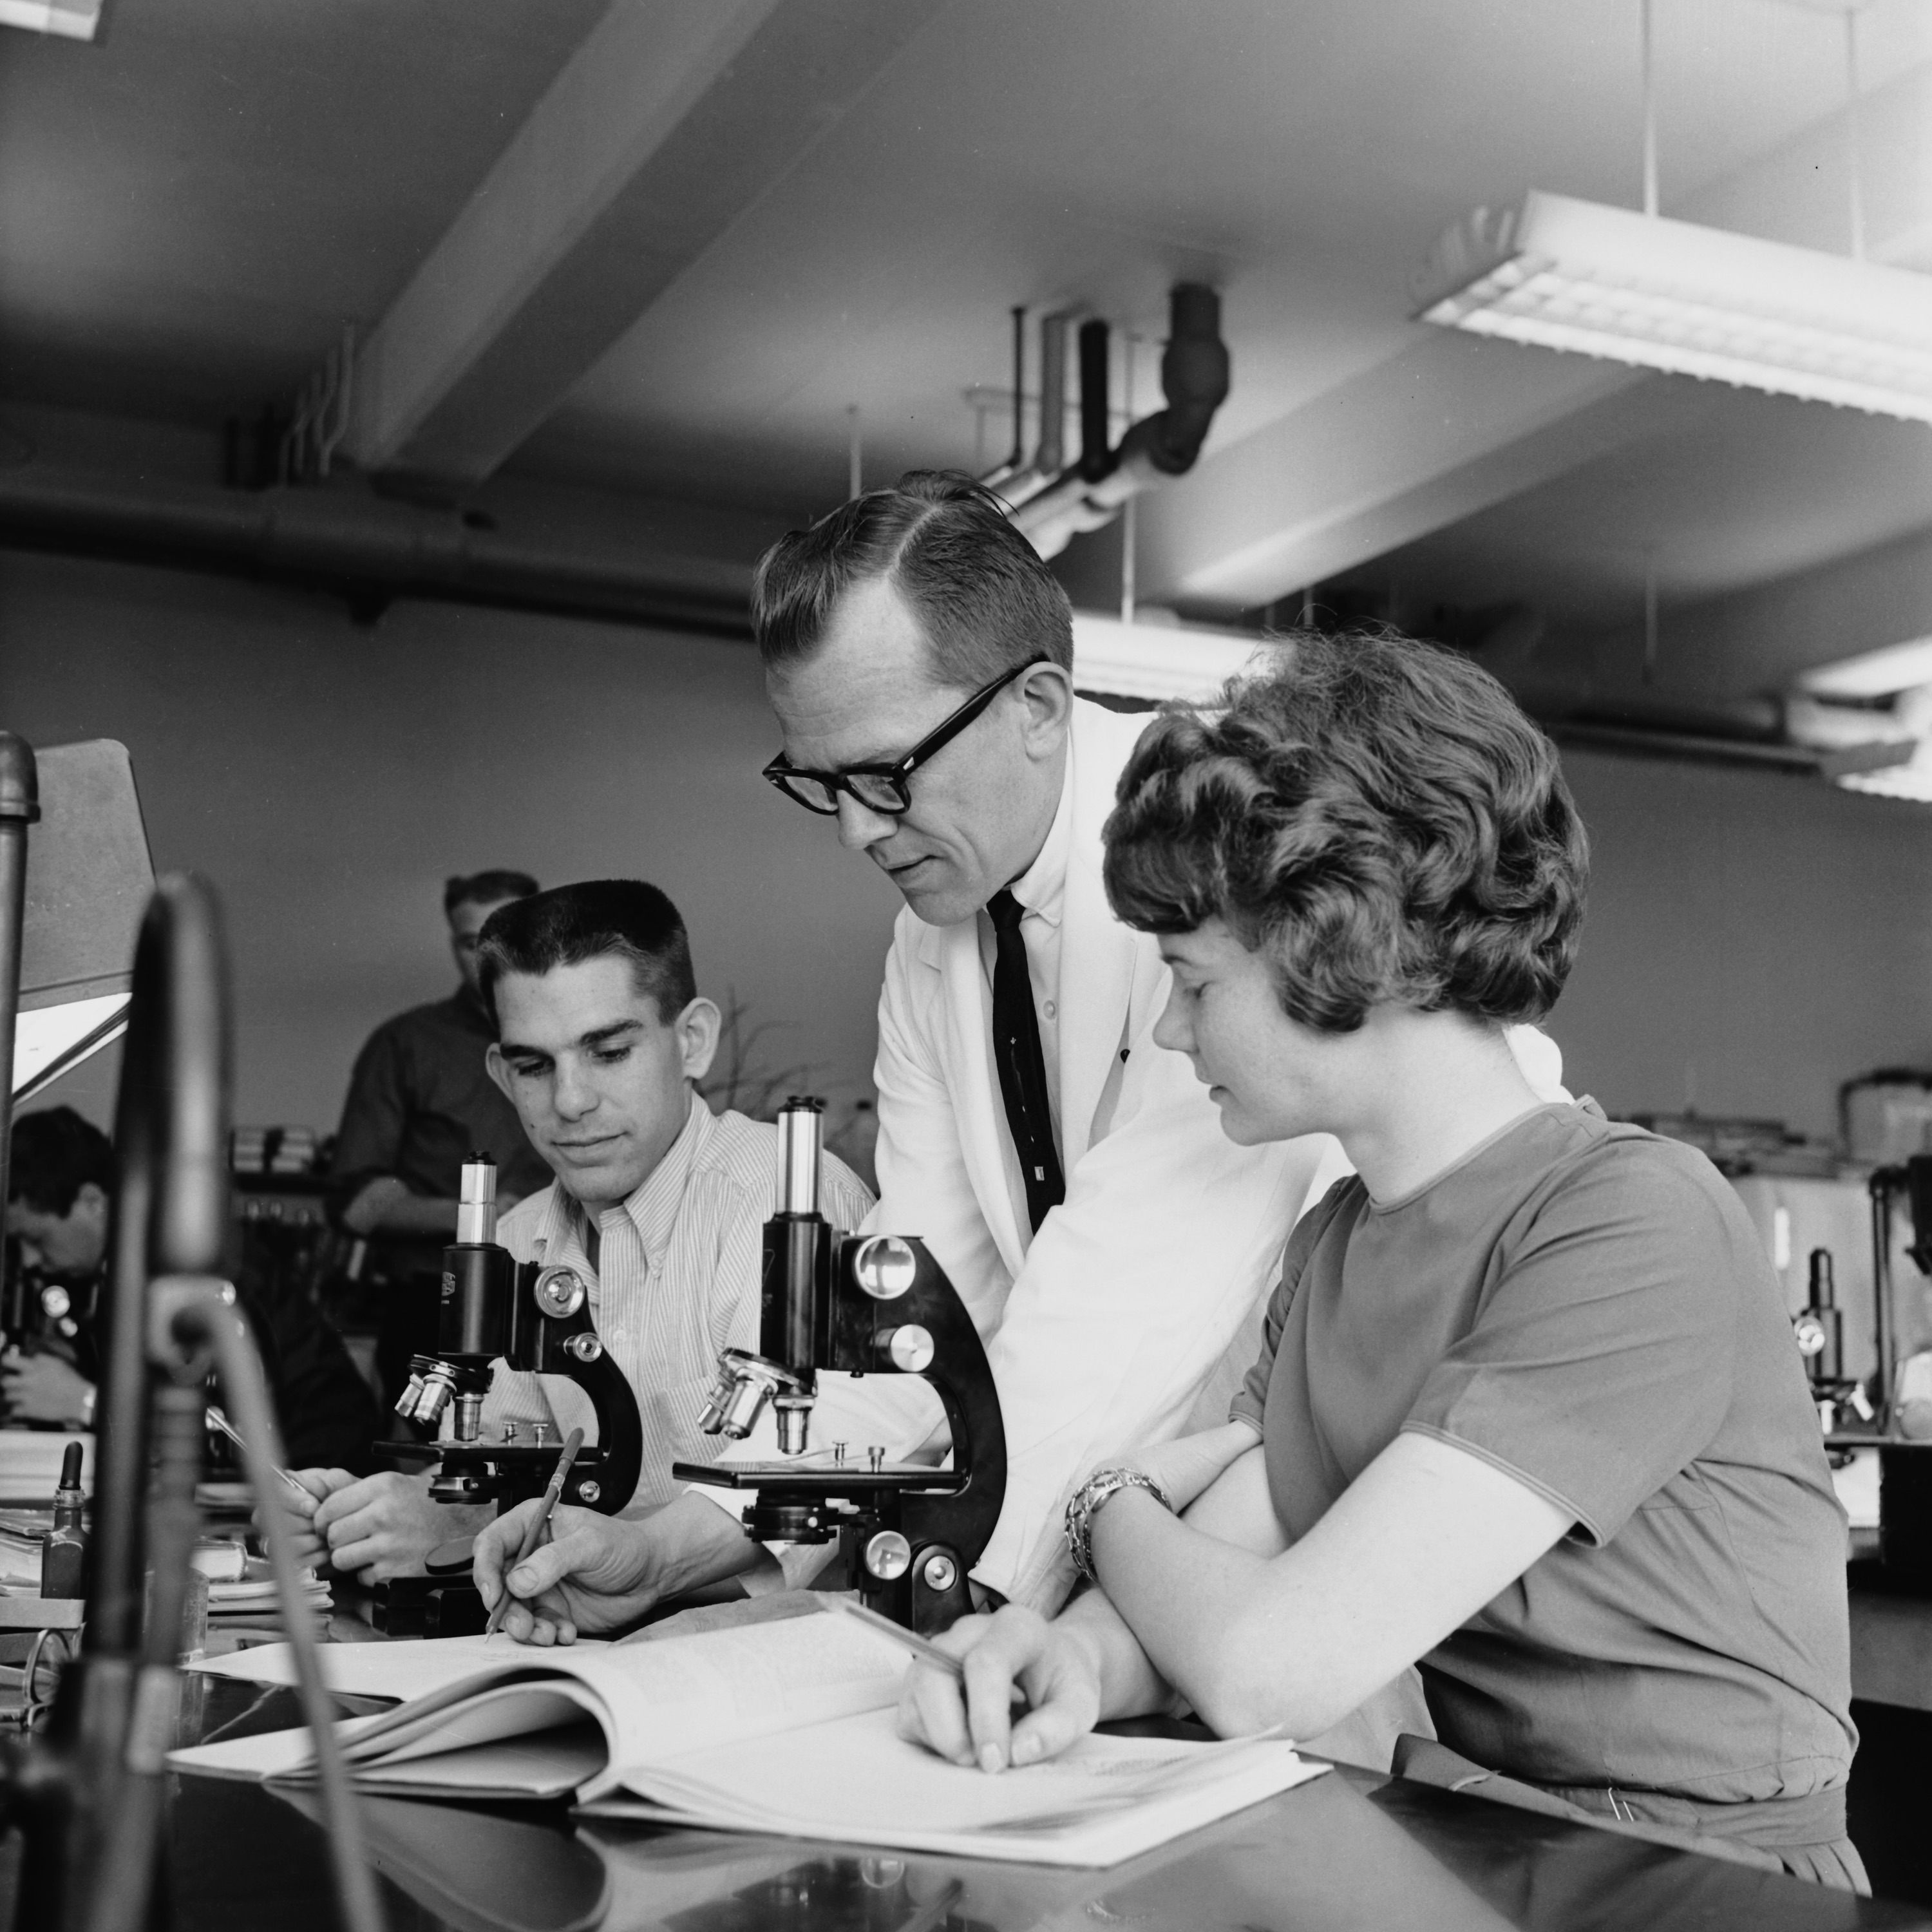 A black and white photo of two students at microscopes and a professor teaching them.